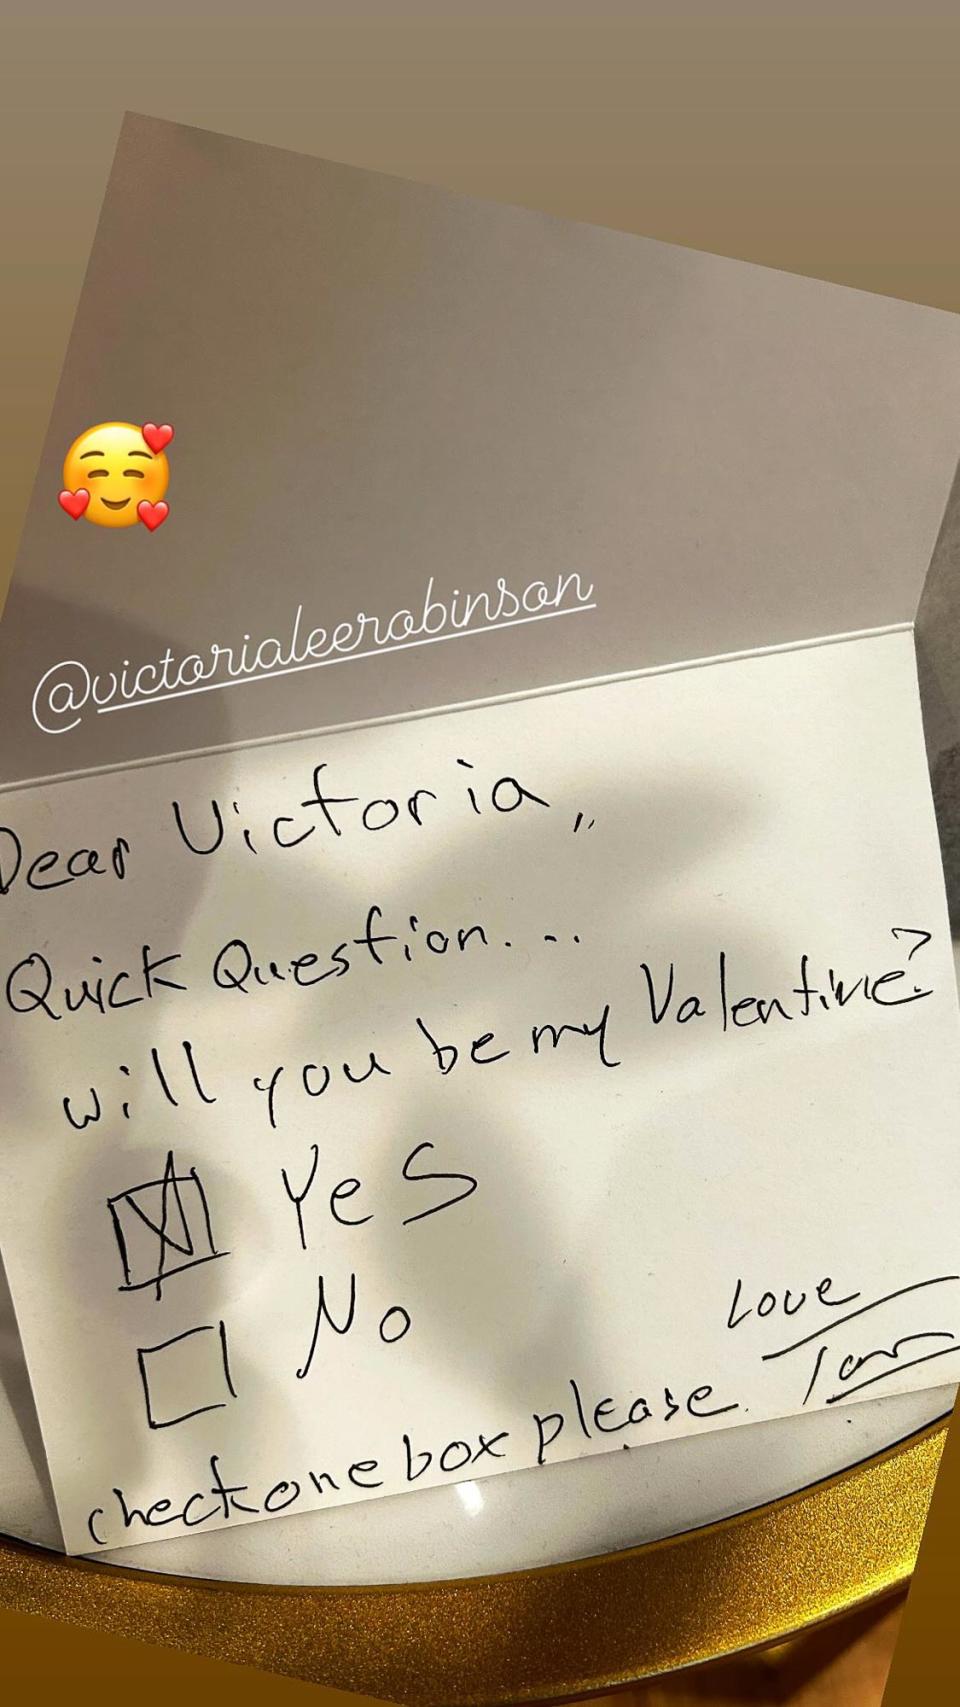 Tom Sandoval Goes Old School Asks Victoria Lee Robinson to Be His Valentine With Handwritten Card 320